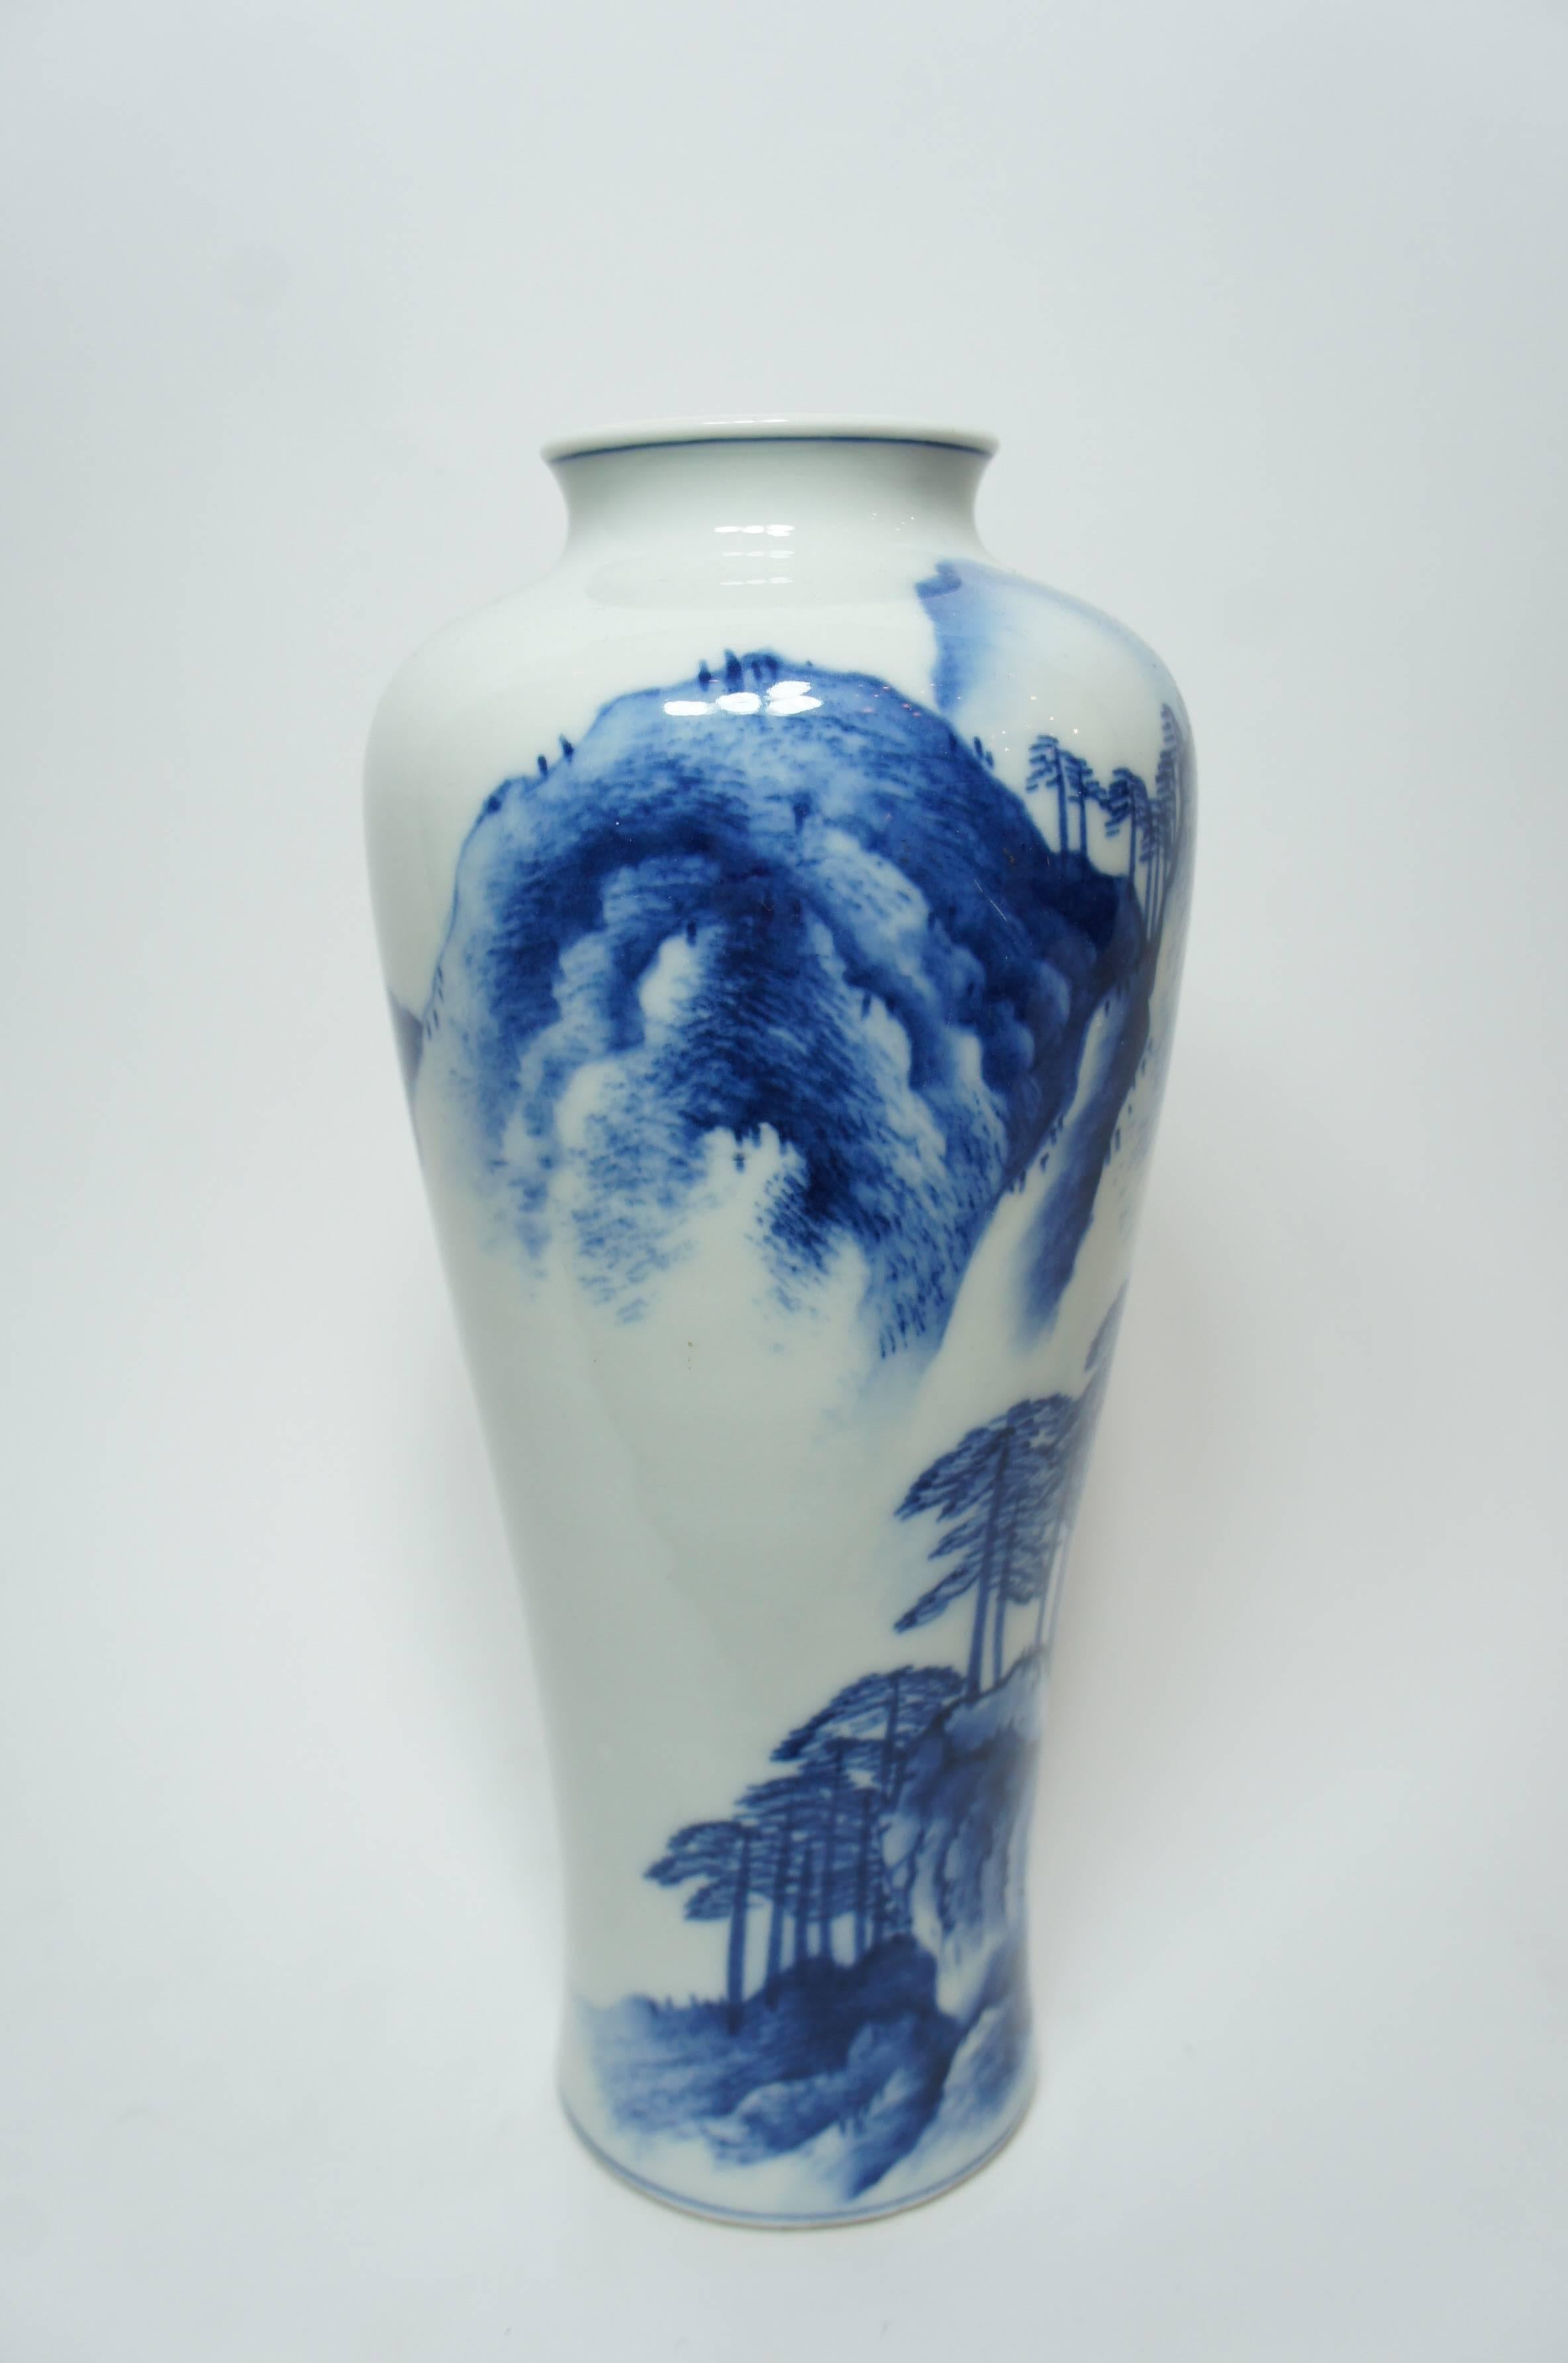 Imari Nabeshima ware vase on which the Chinese style landscape is drawn with indigo blue color. 

The kilns of Arita have formed the heart of the Japanese porcelain industry for many centuries. And Imari Nabeshima ware is one of that.
Nabeshima